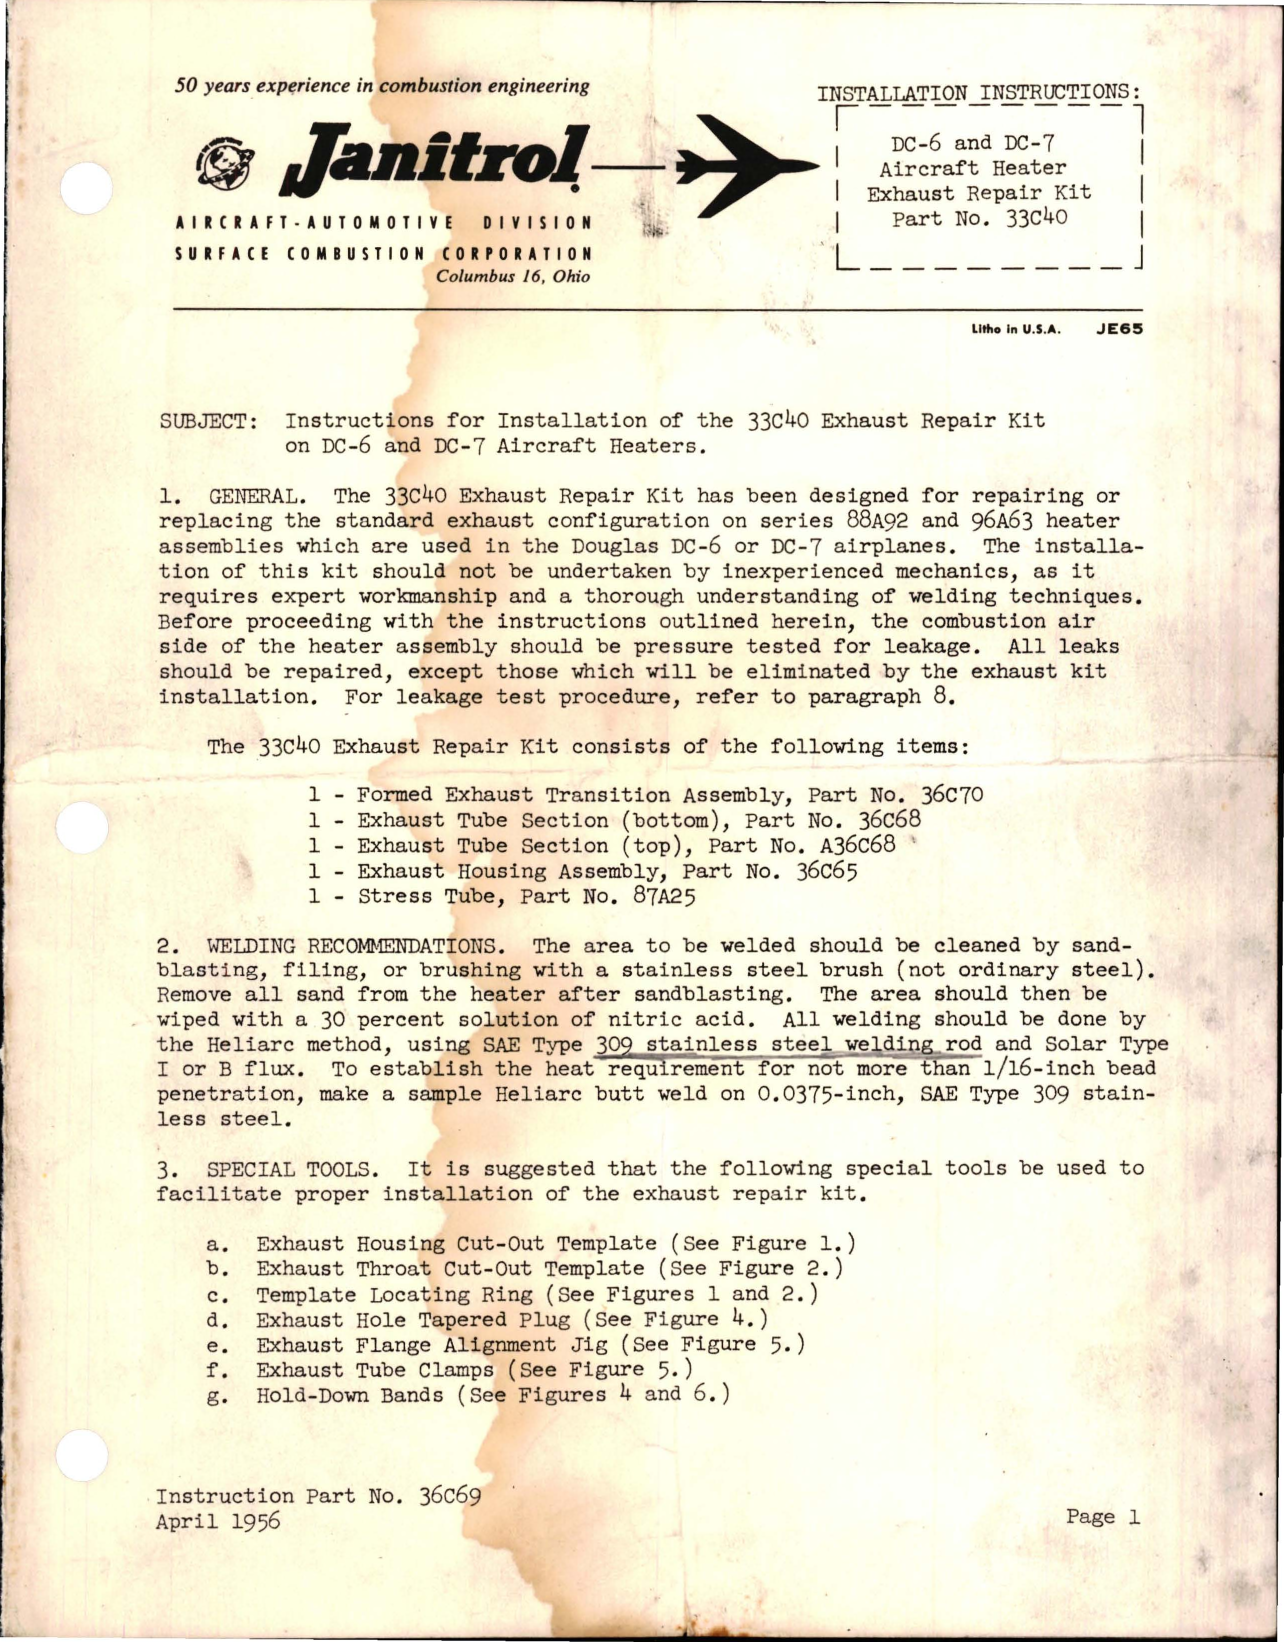 Sample page 1 from AirCorps Library document: Installation Instructions for DC-6 and DC-7 Aircraft Heater Exhaust Repair Kit - Part 33C40